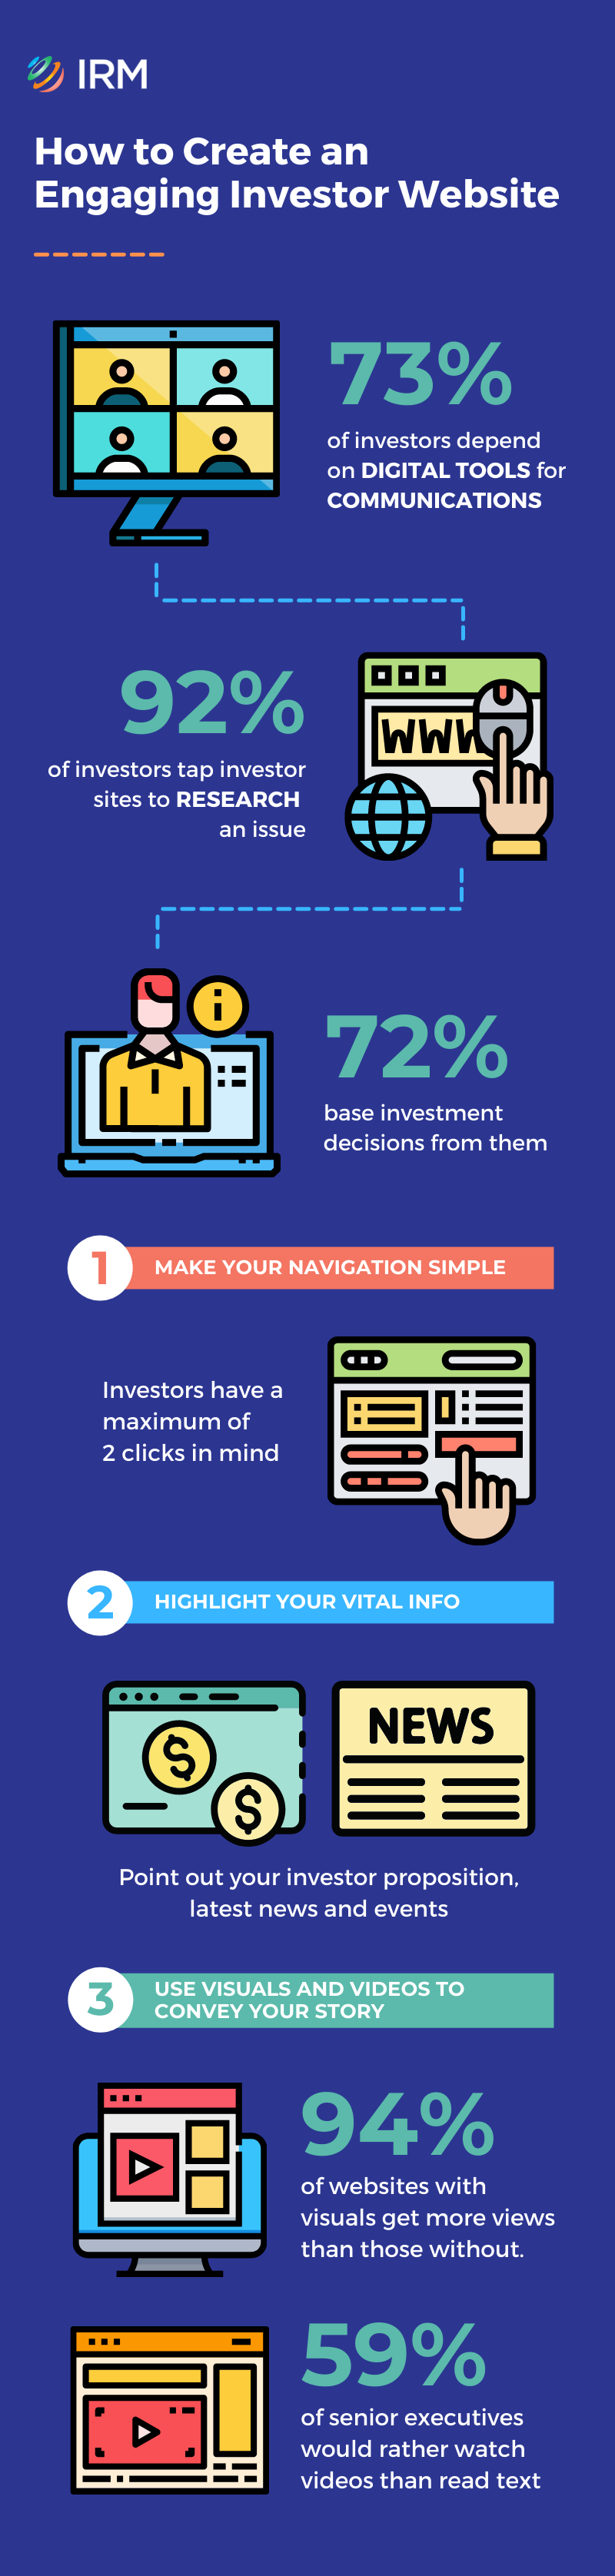 Infographic engaging investor website